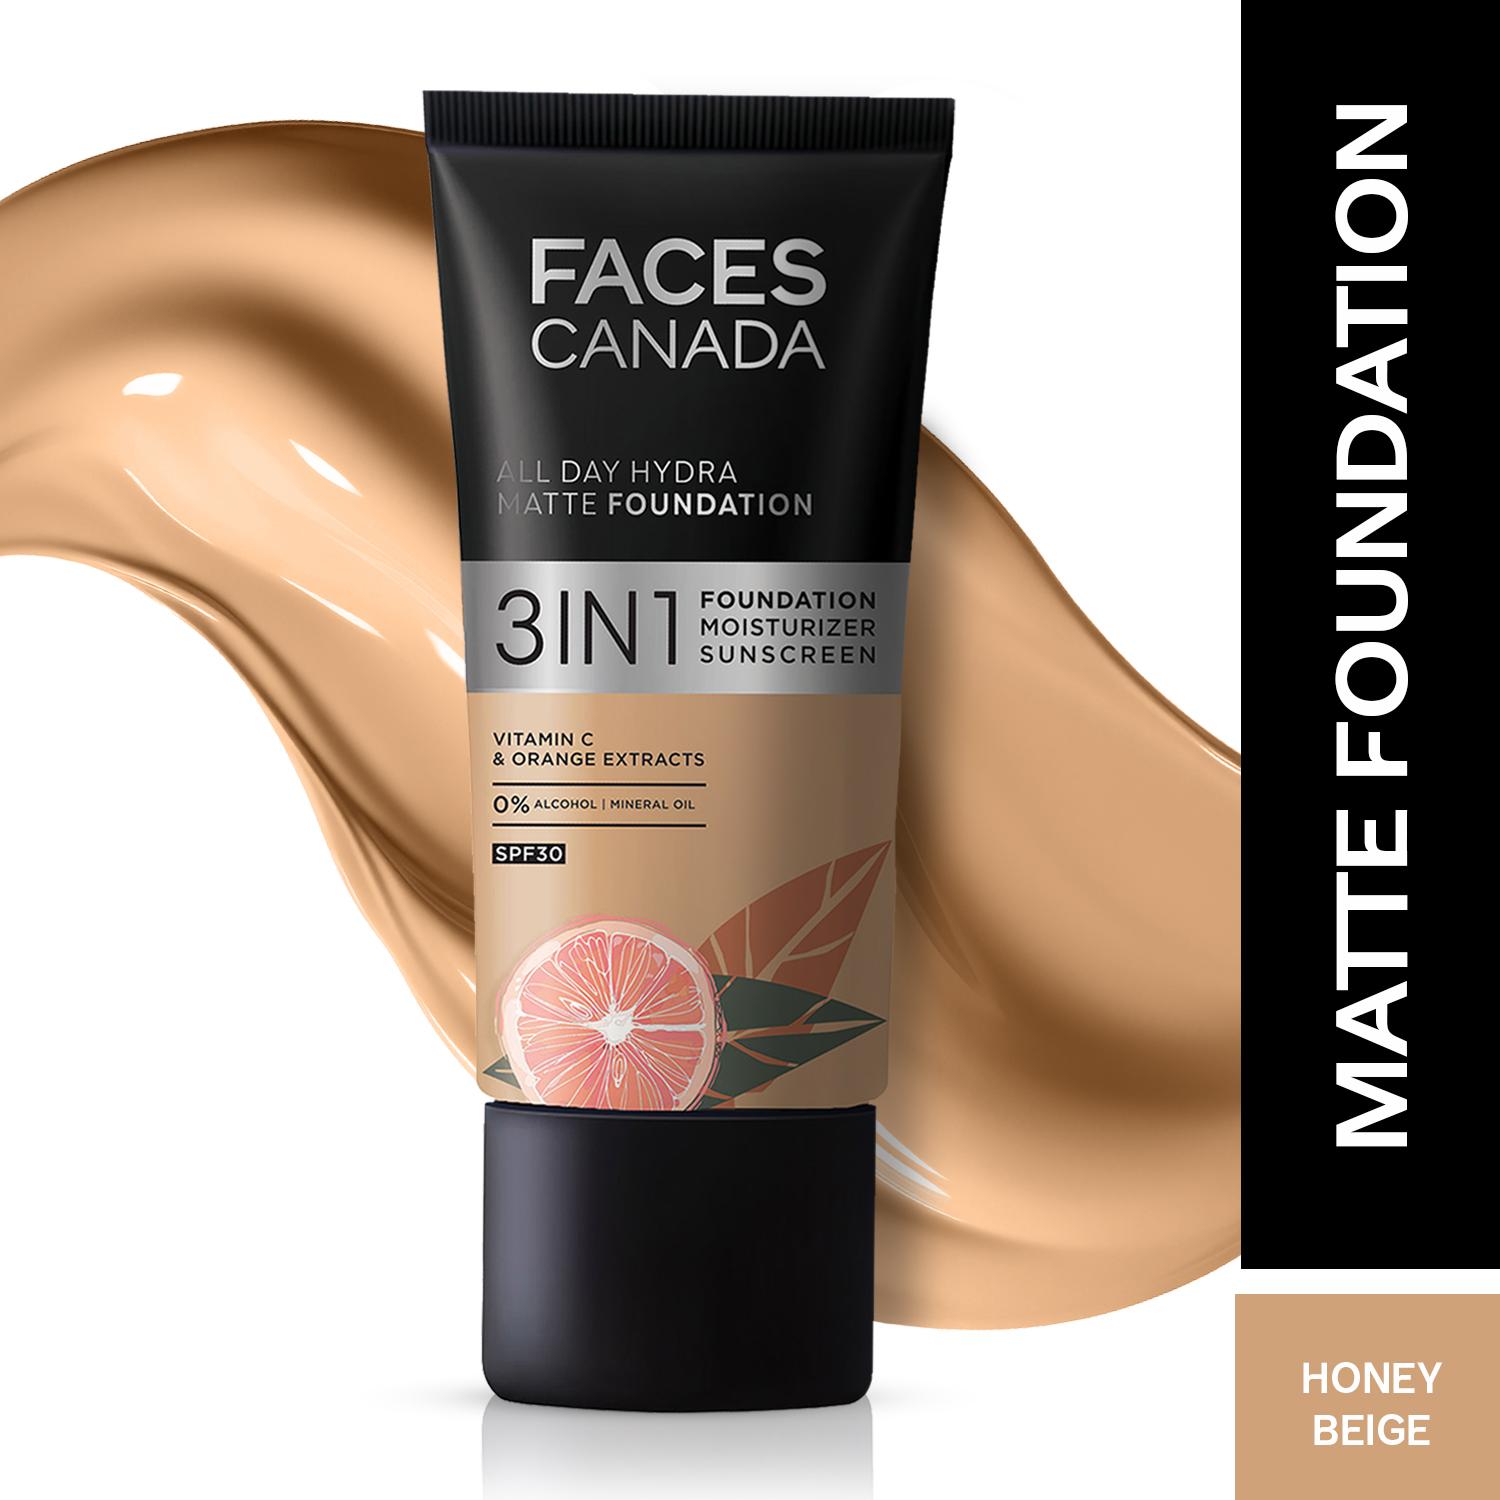 Faces Canada | Faces Canada 3in1 All Day Hydra Matte Foundation + Moisturizer + SPF 30 - Honey Beige 031 (25 ml)